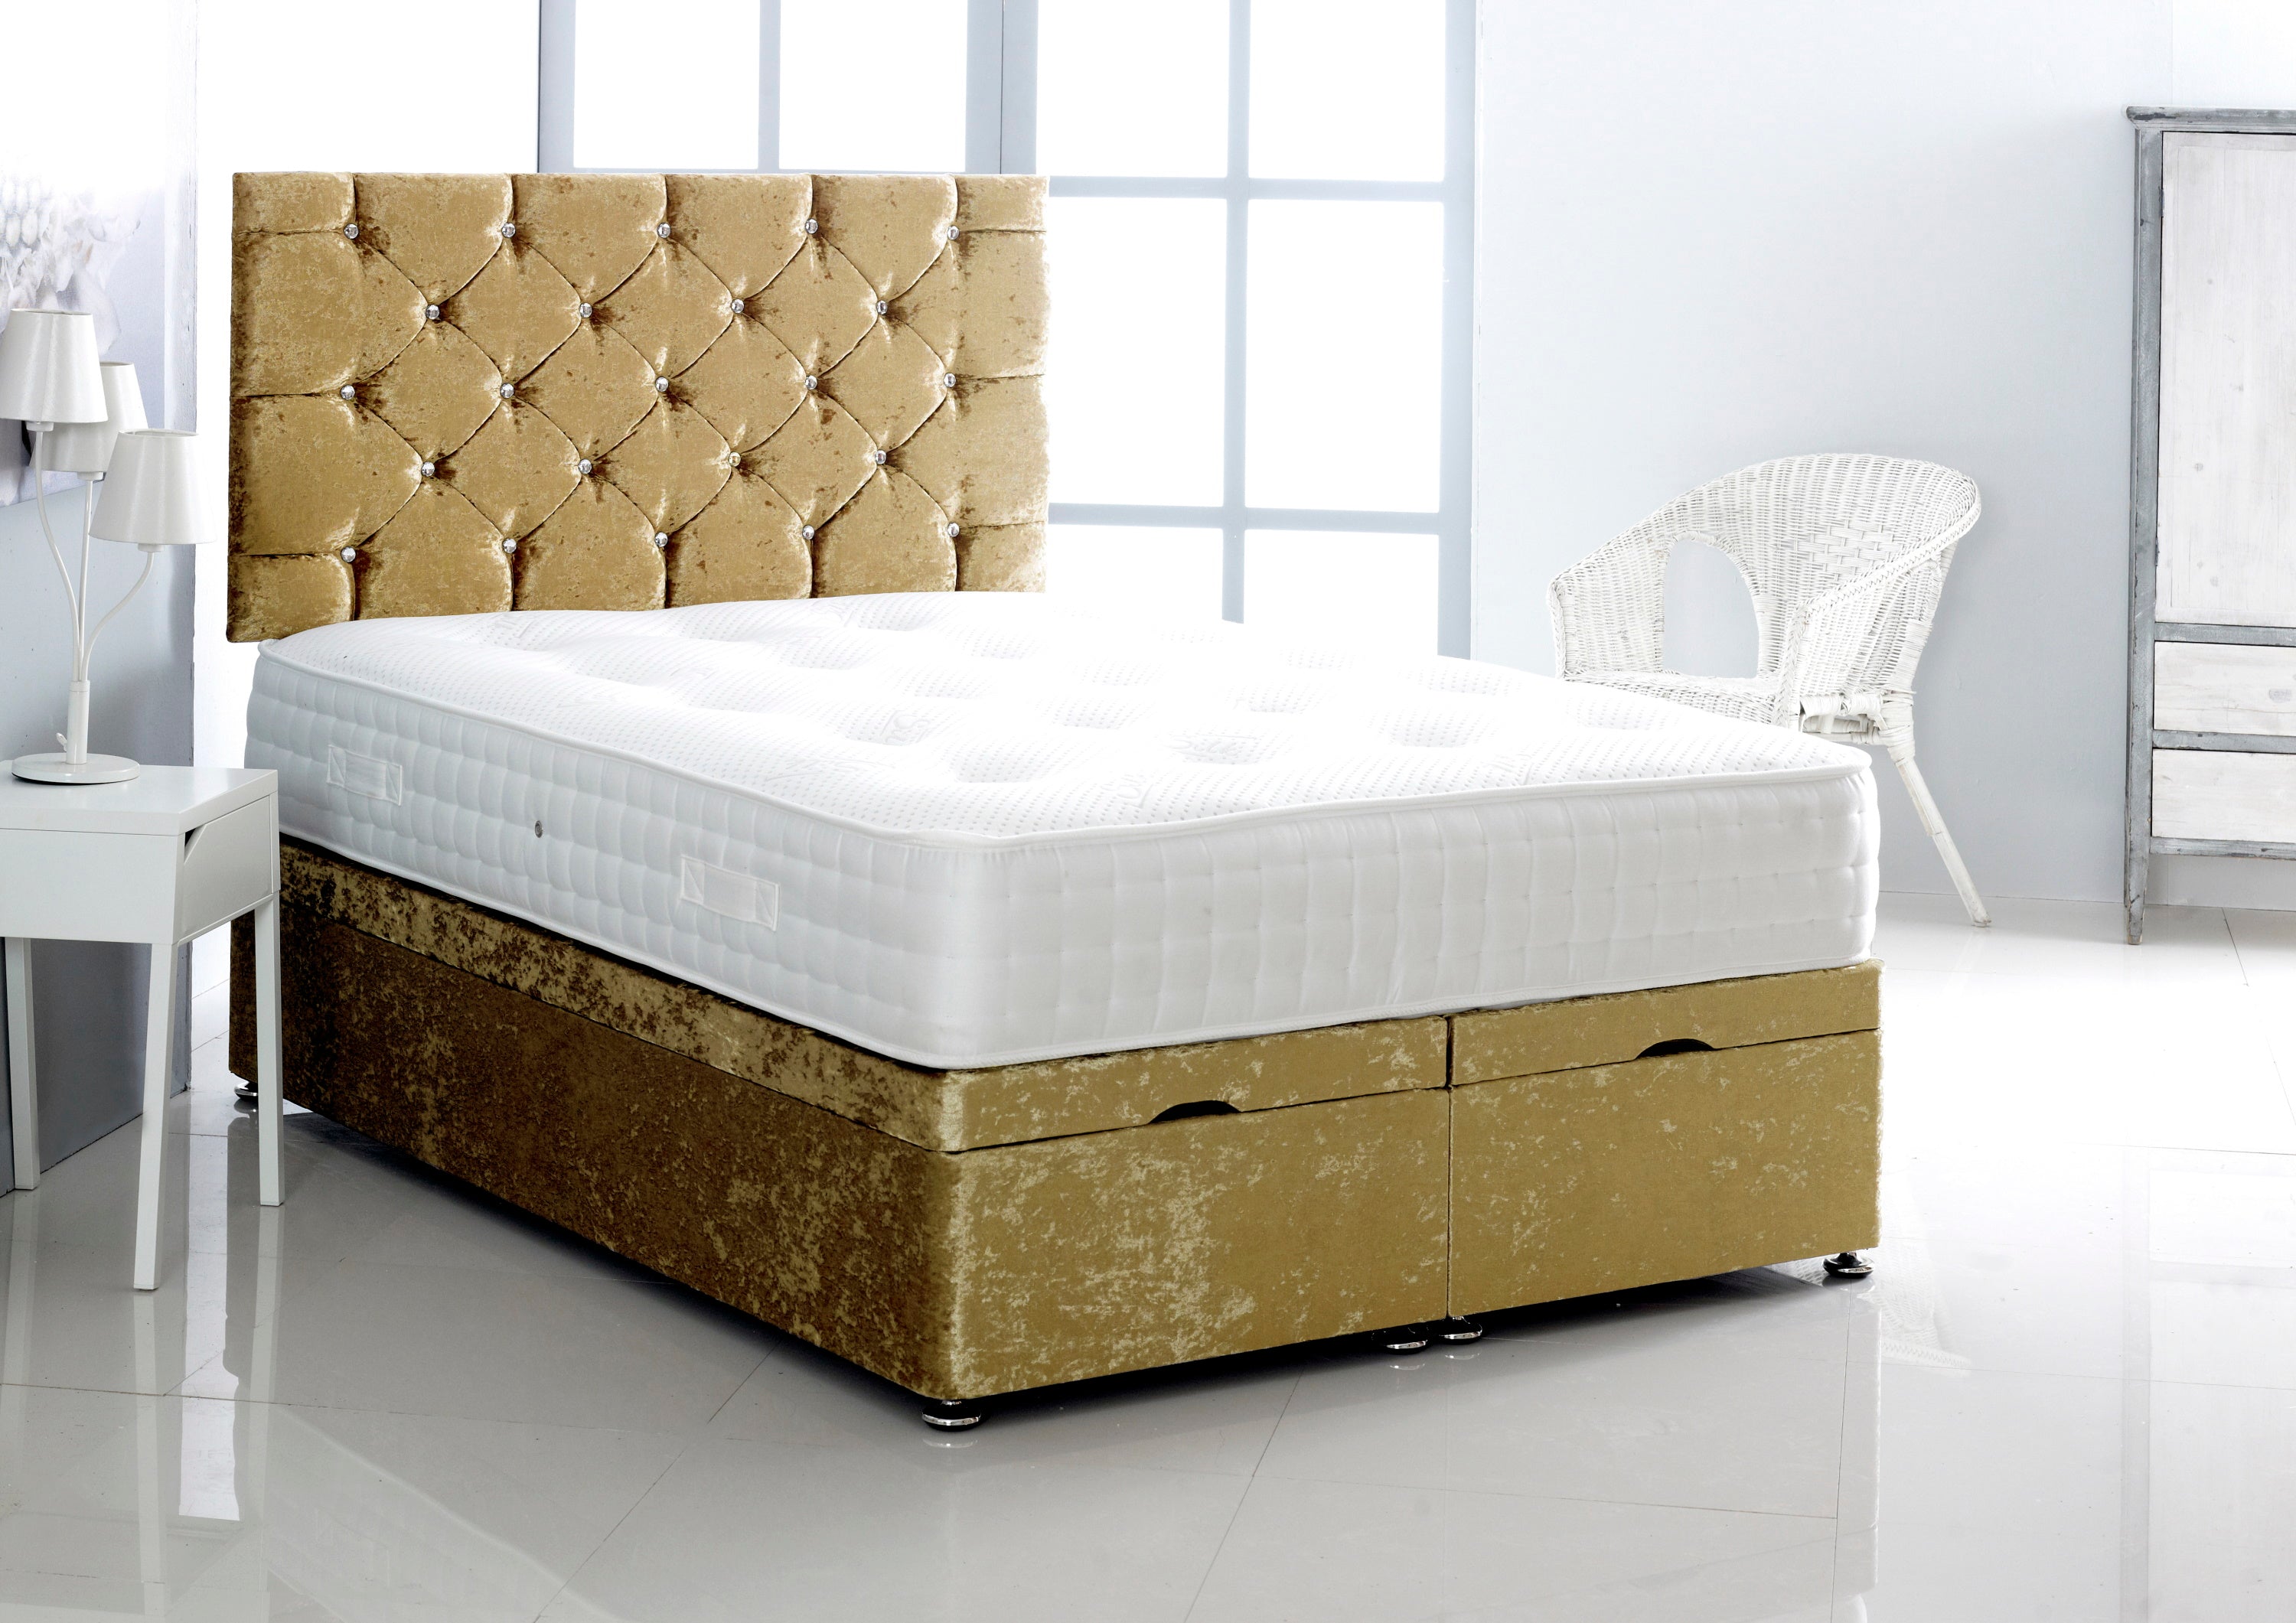 Crushed Velvet Ottoman Storage Divan Bed With Chesterfield Headboard